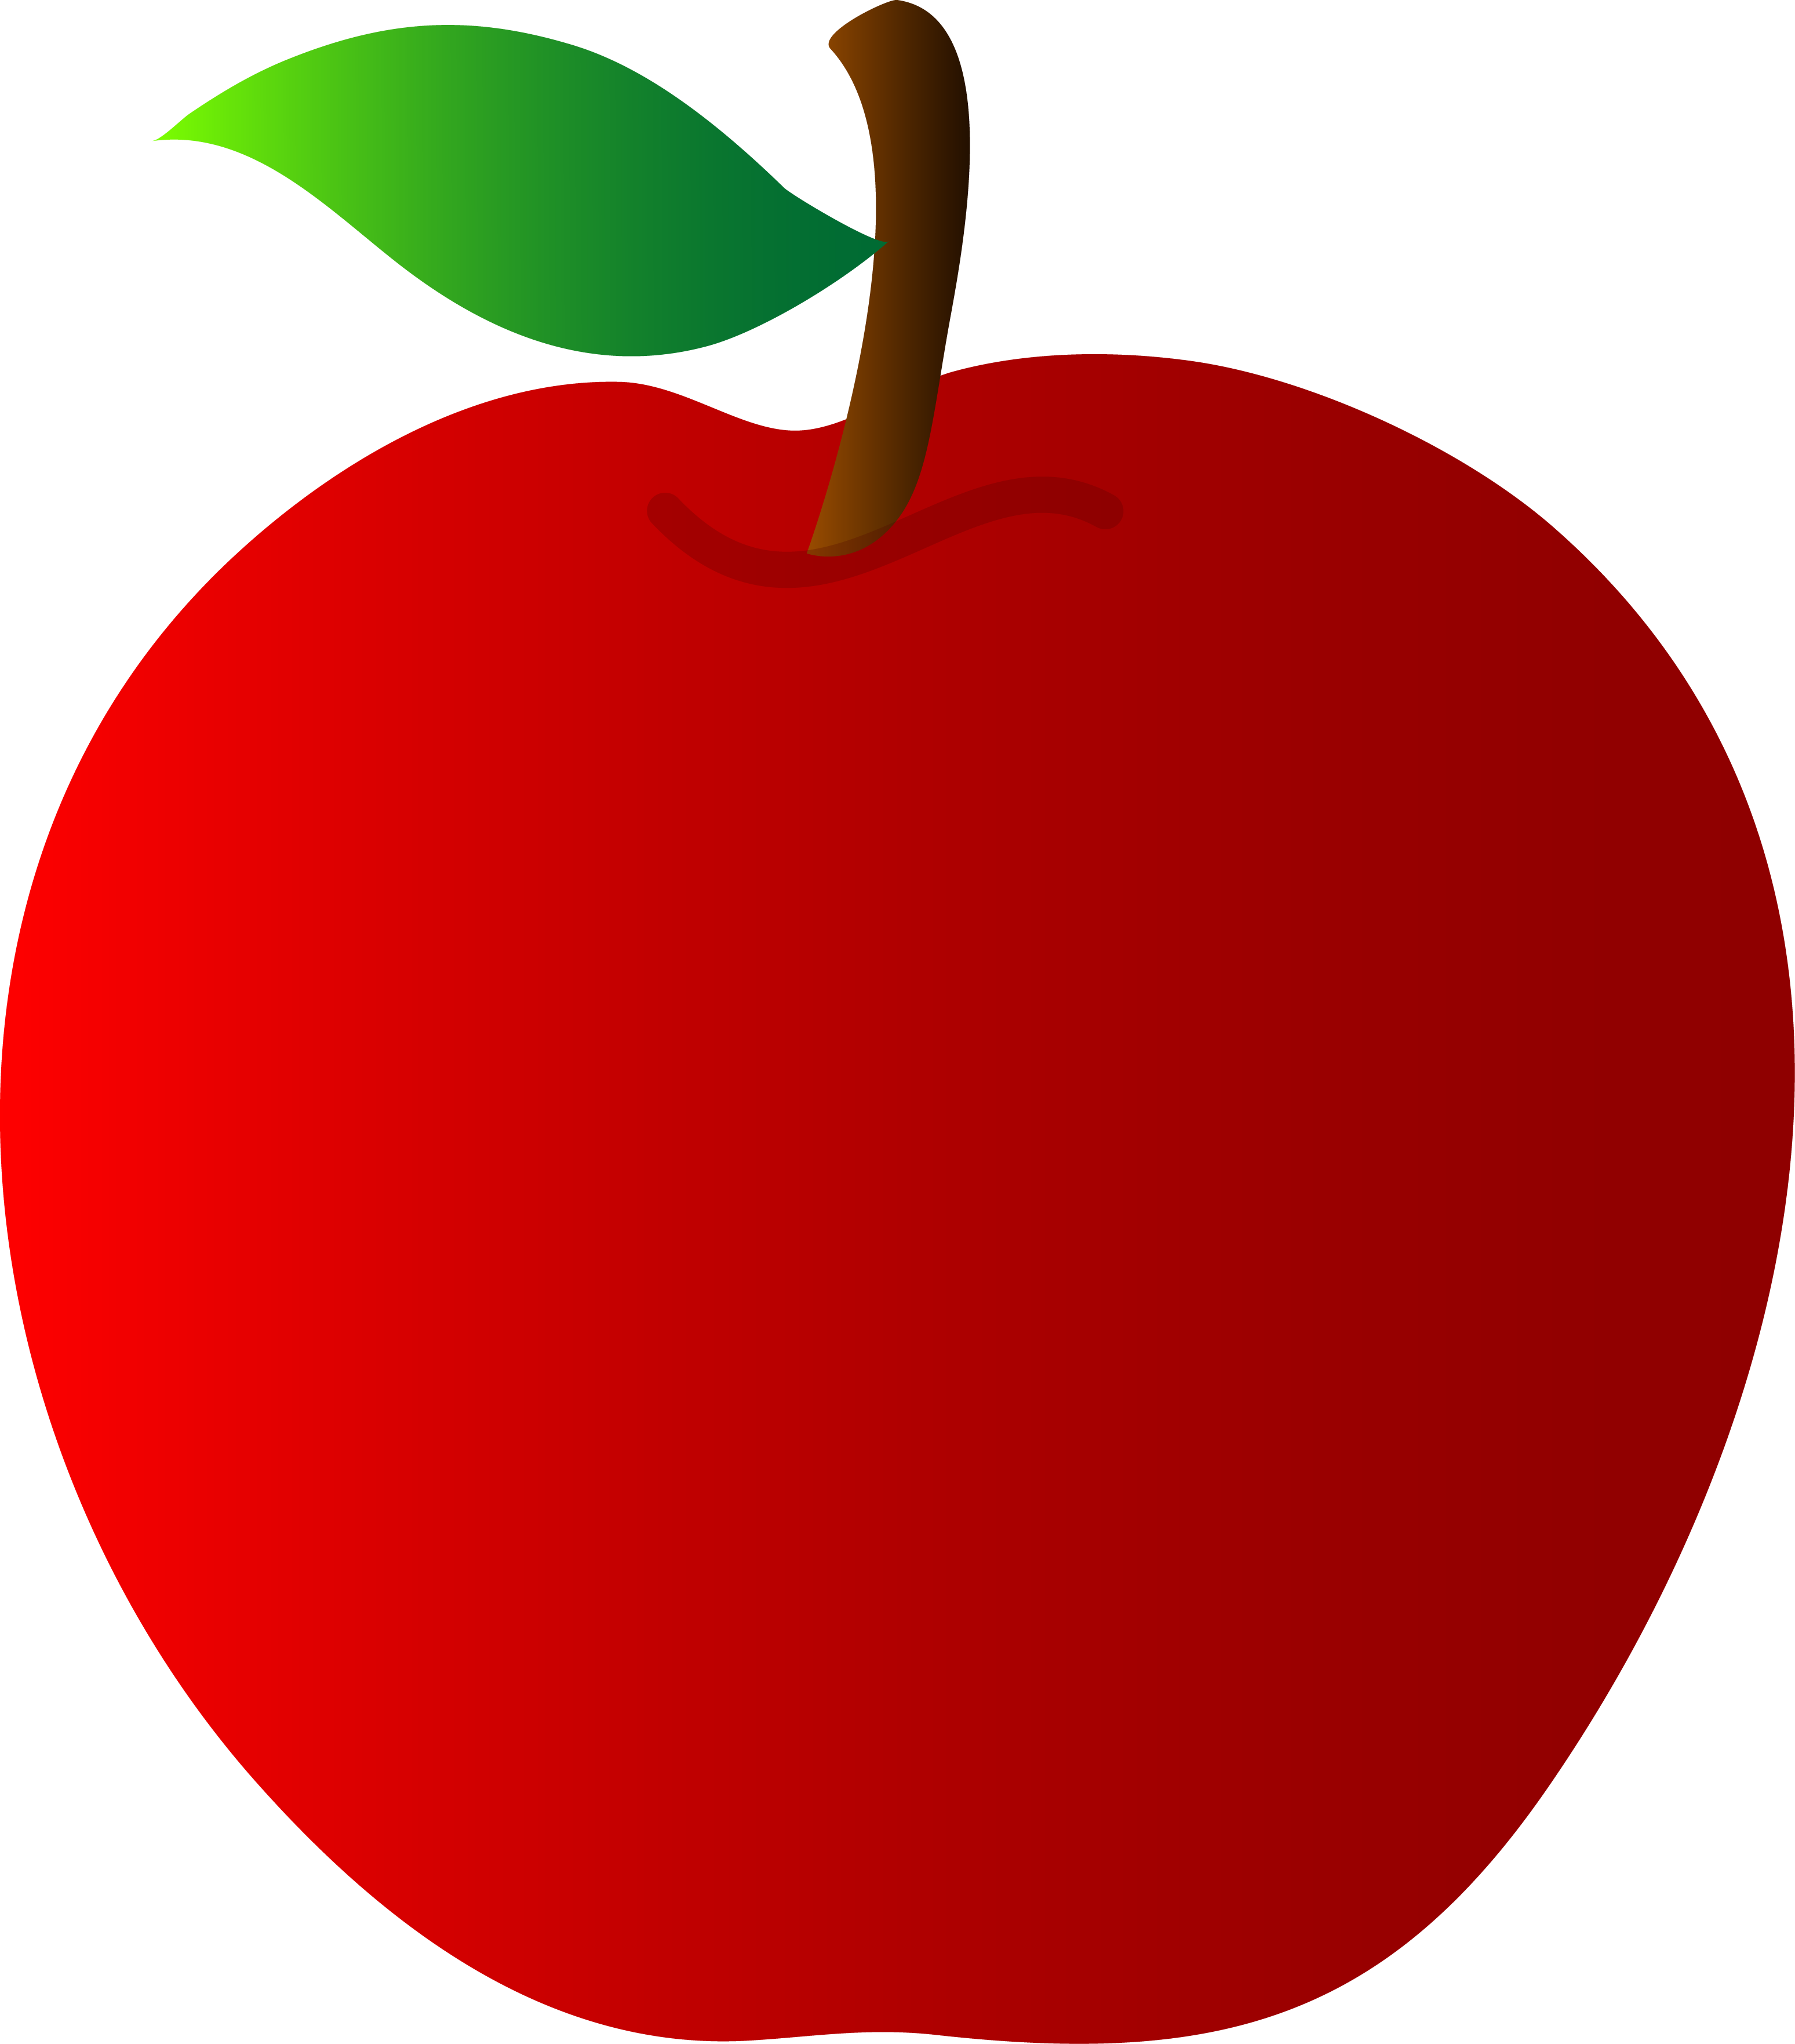 Picture Of Apples - ClipArt Best